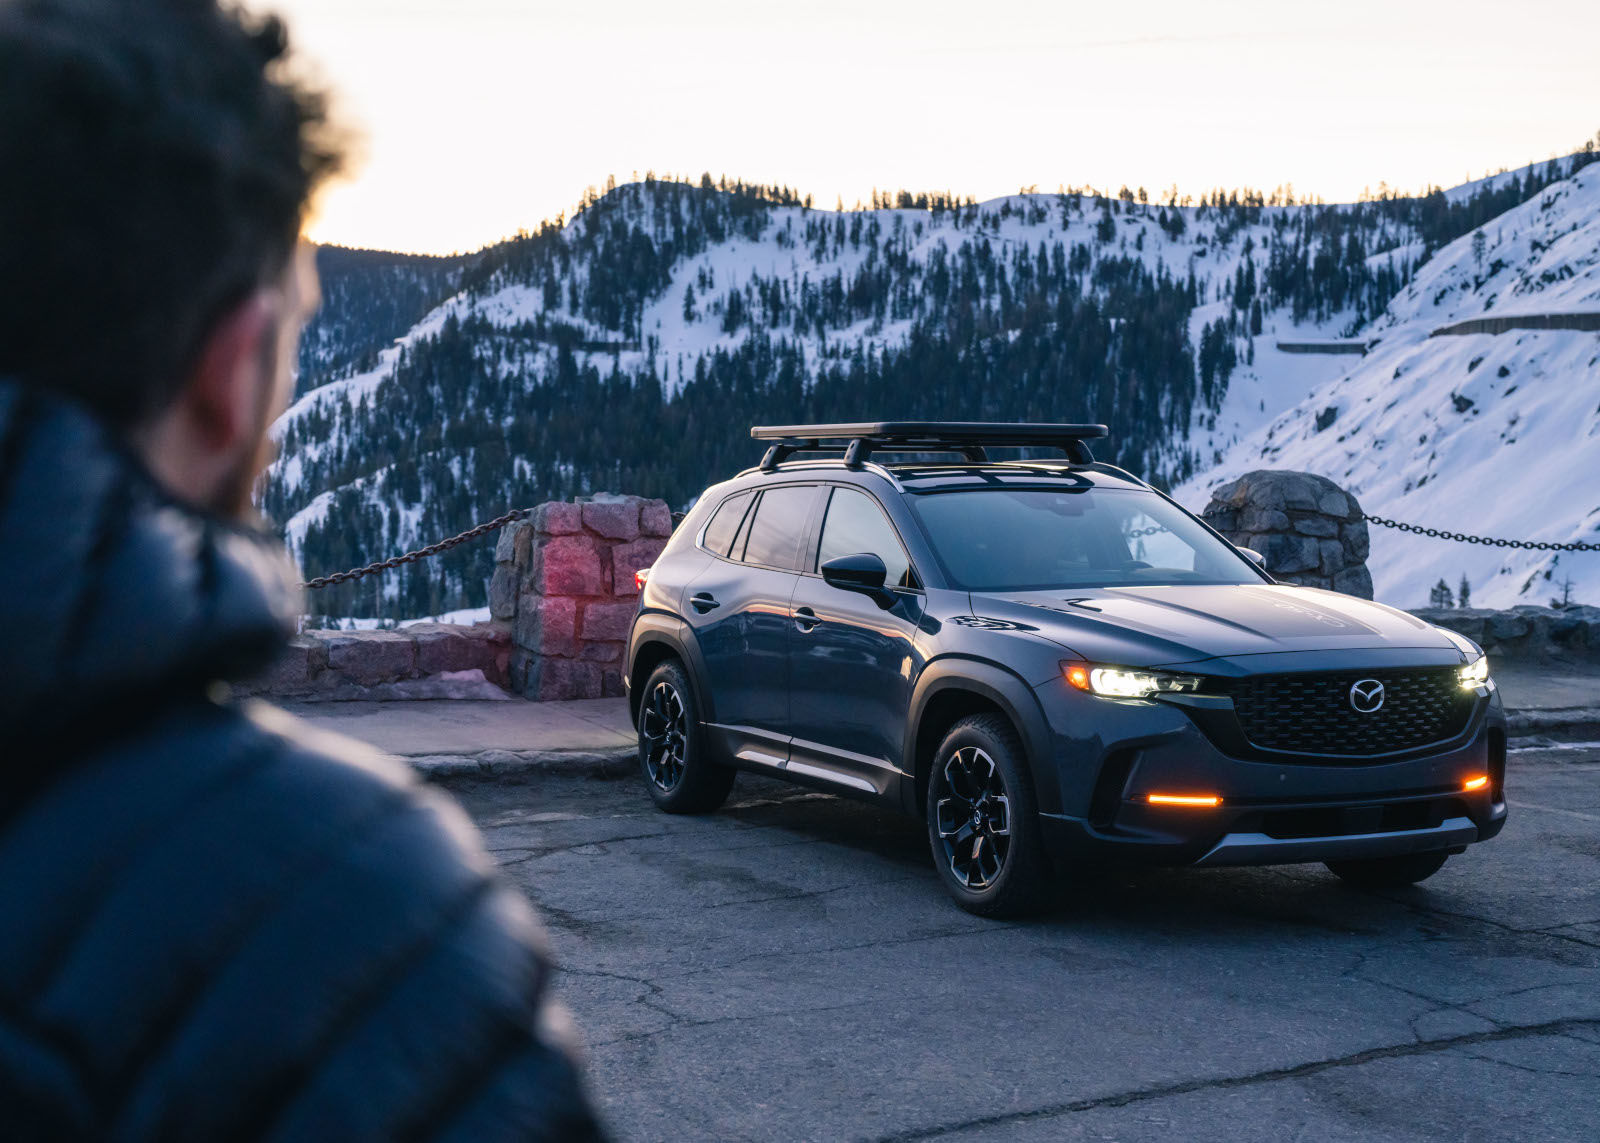 A Look at the New 2023 Mazda CX-50